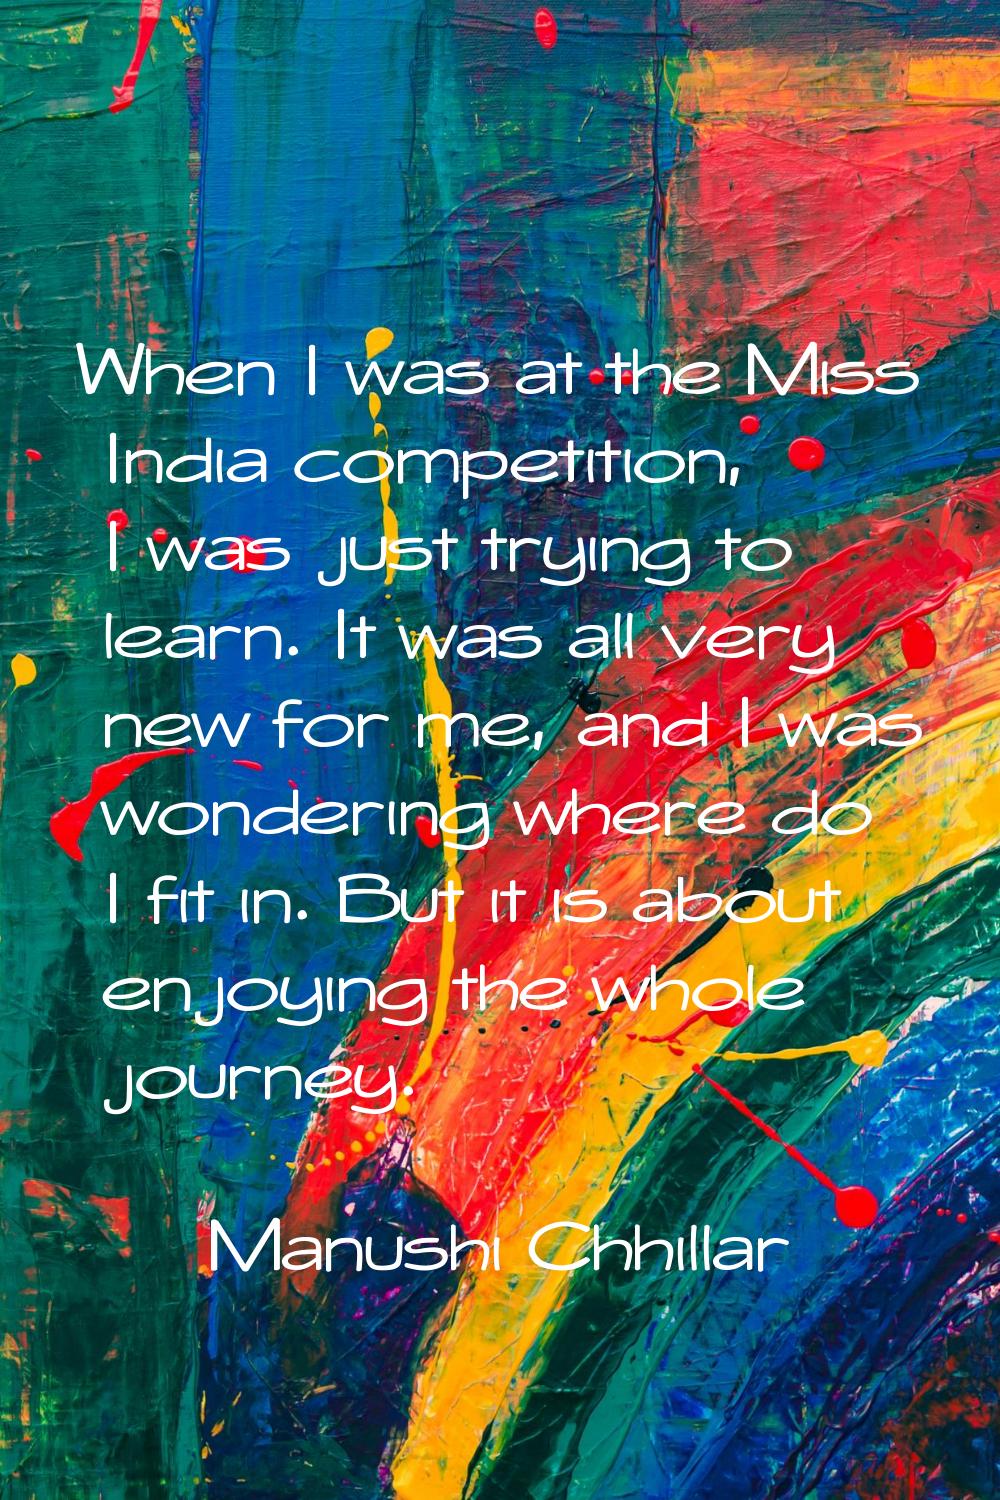 When I was at the Miss India competition, I was just trying to learn. It was all very new for me, a